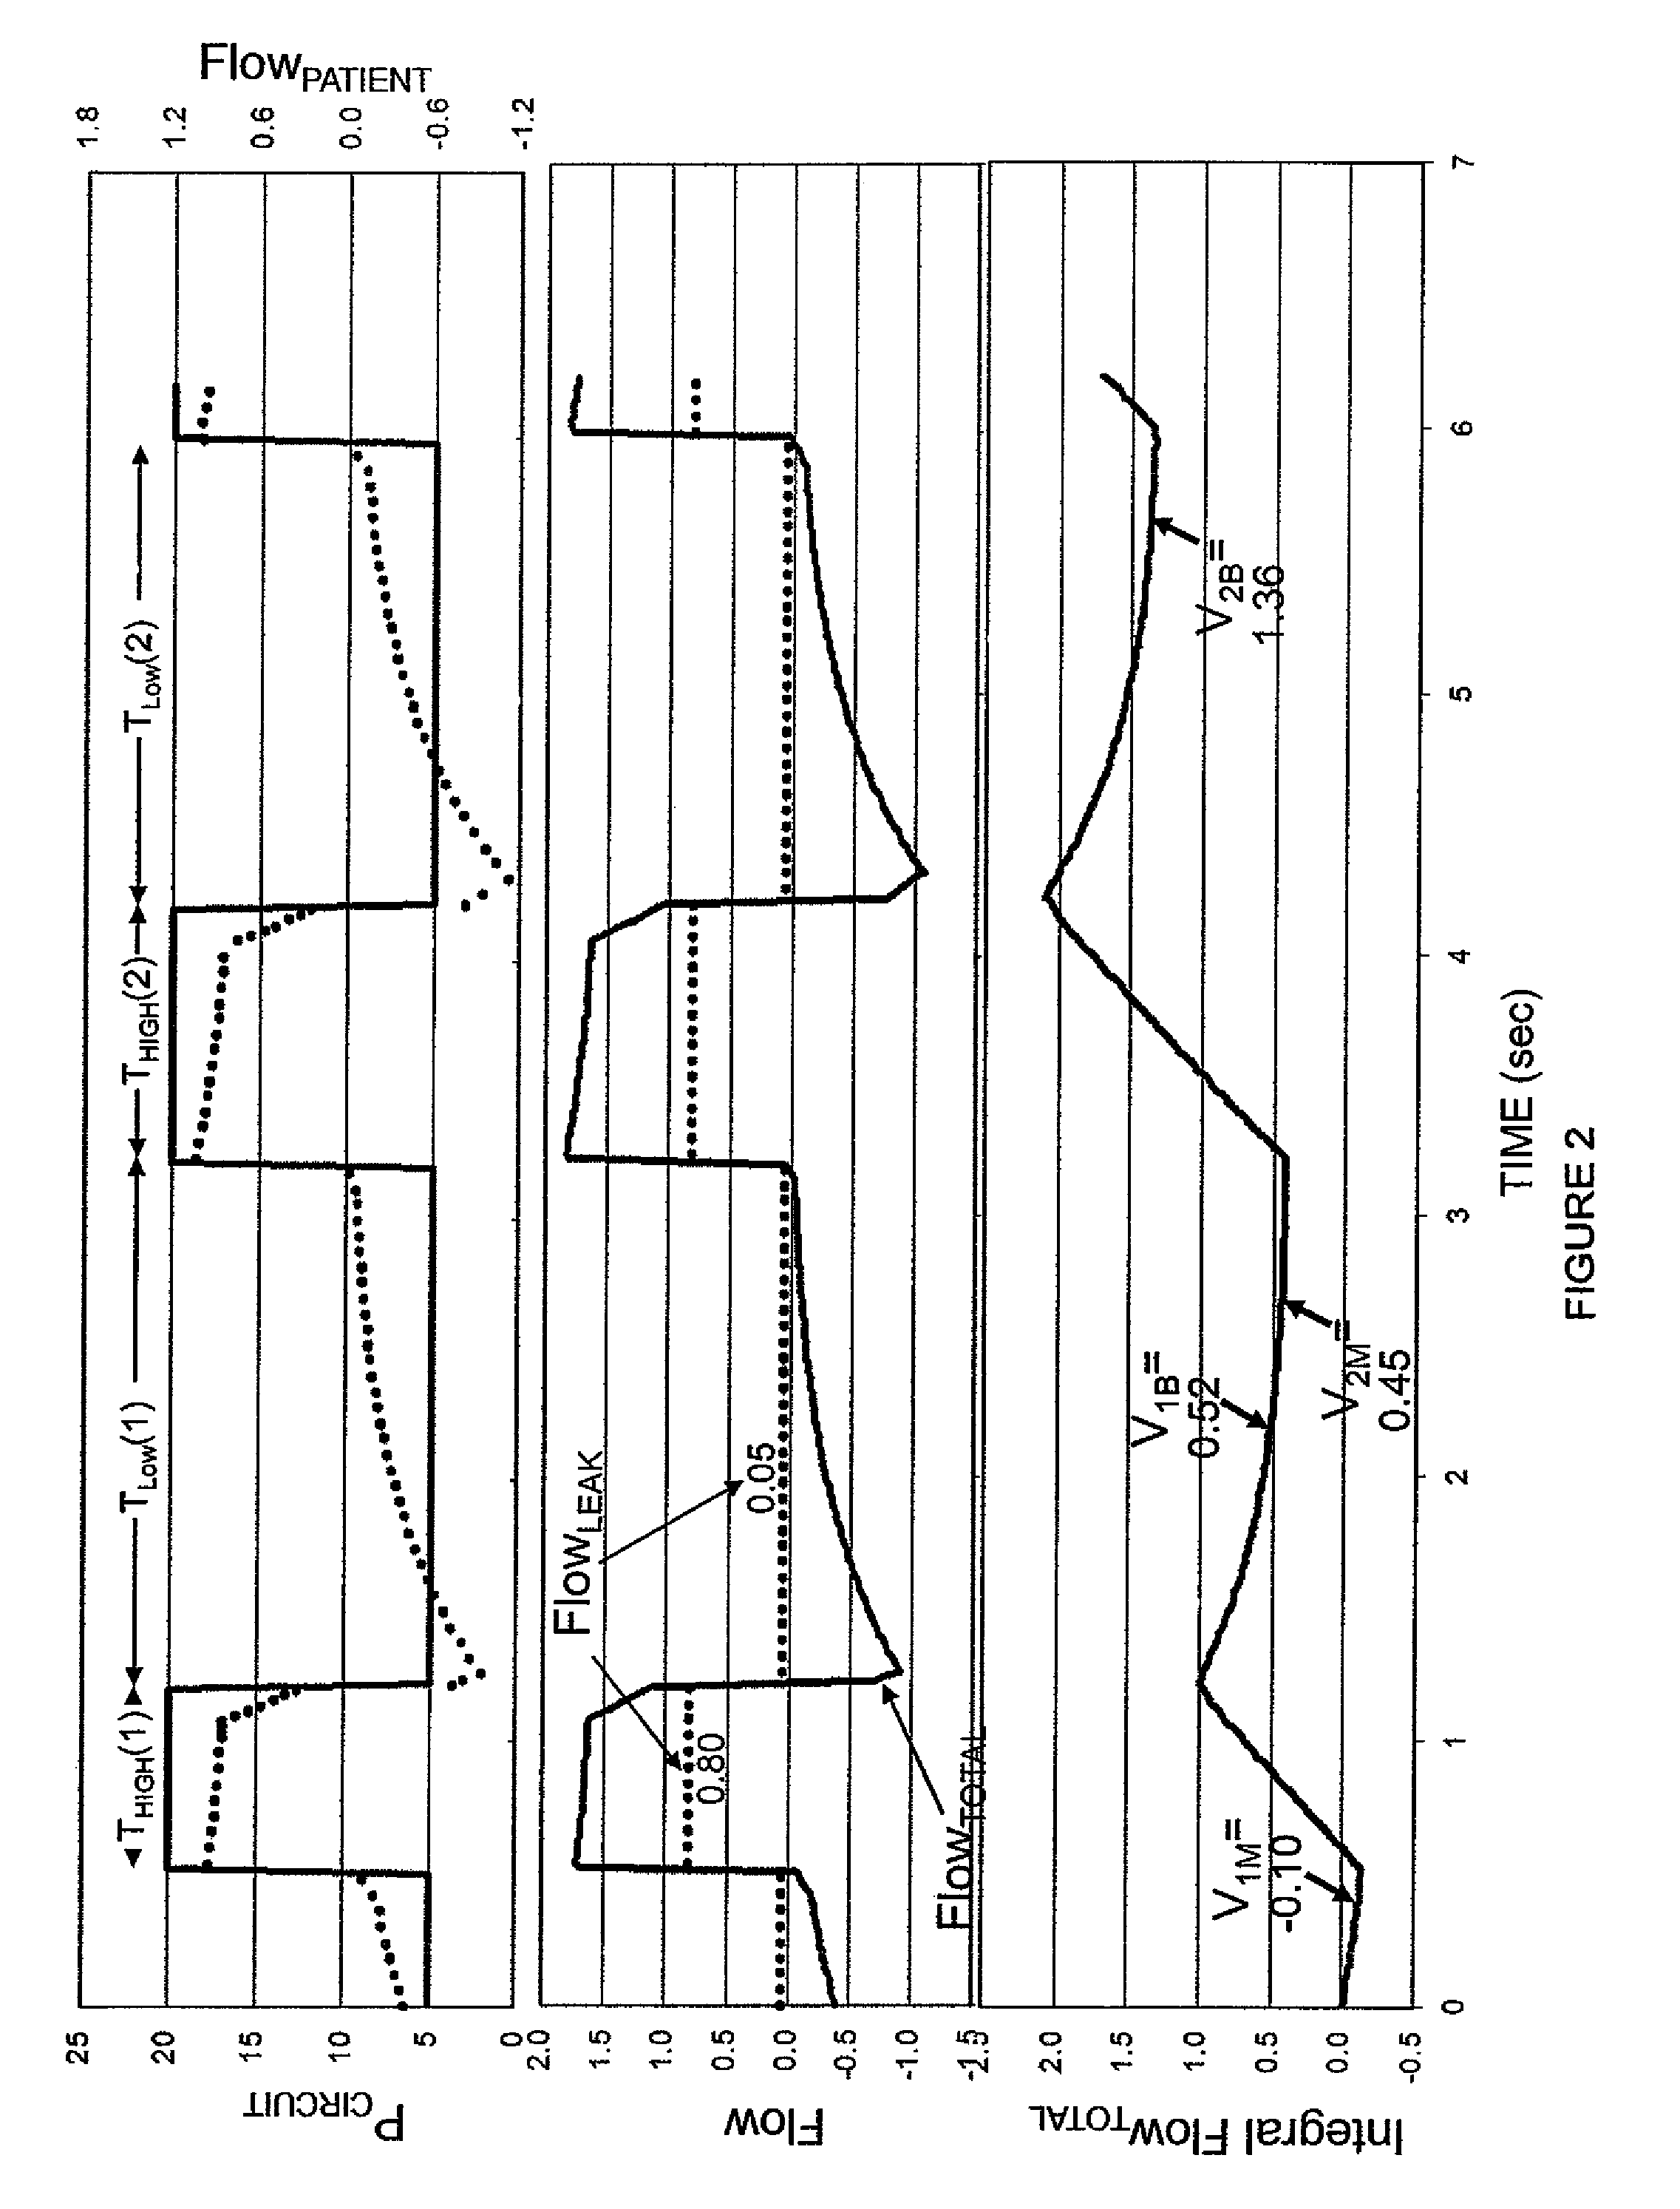 Method for estimating leaks from ventilator circuits